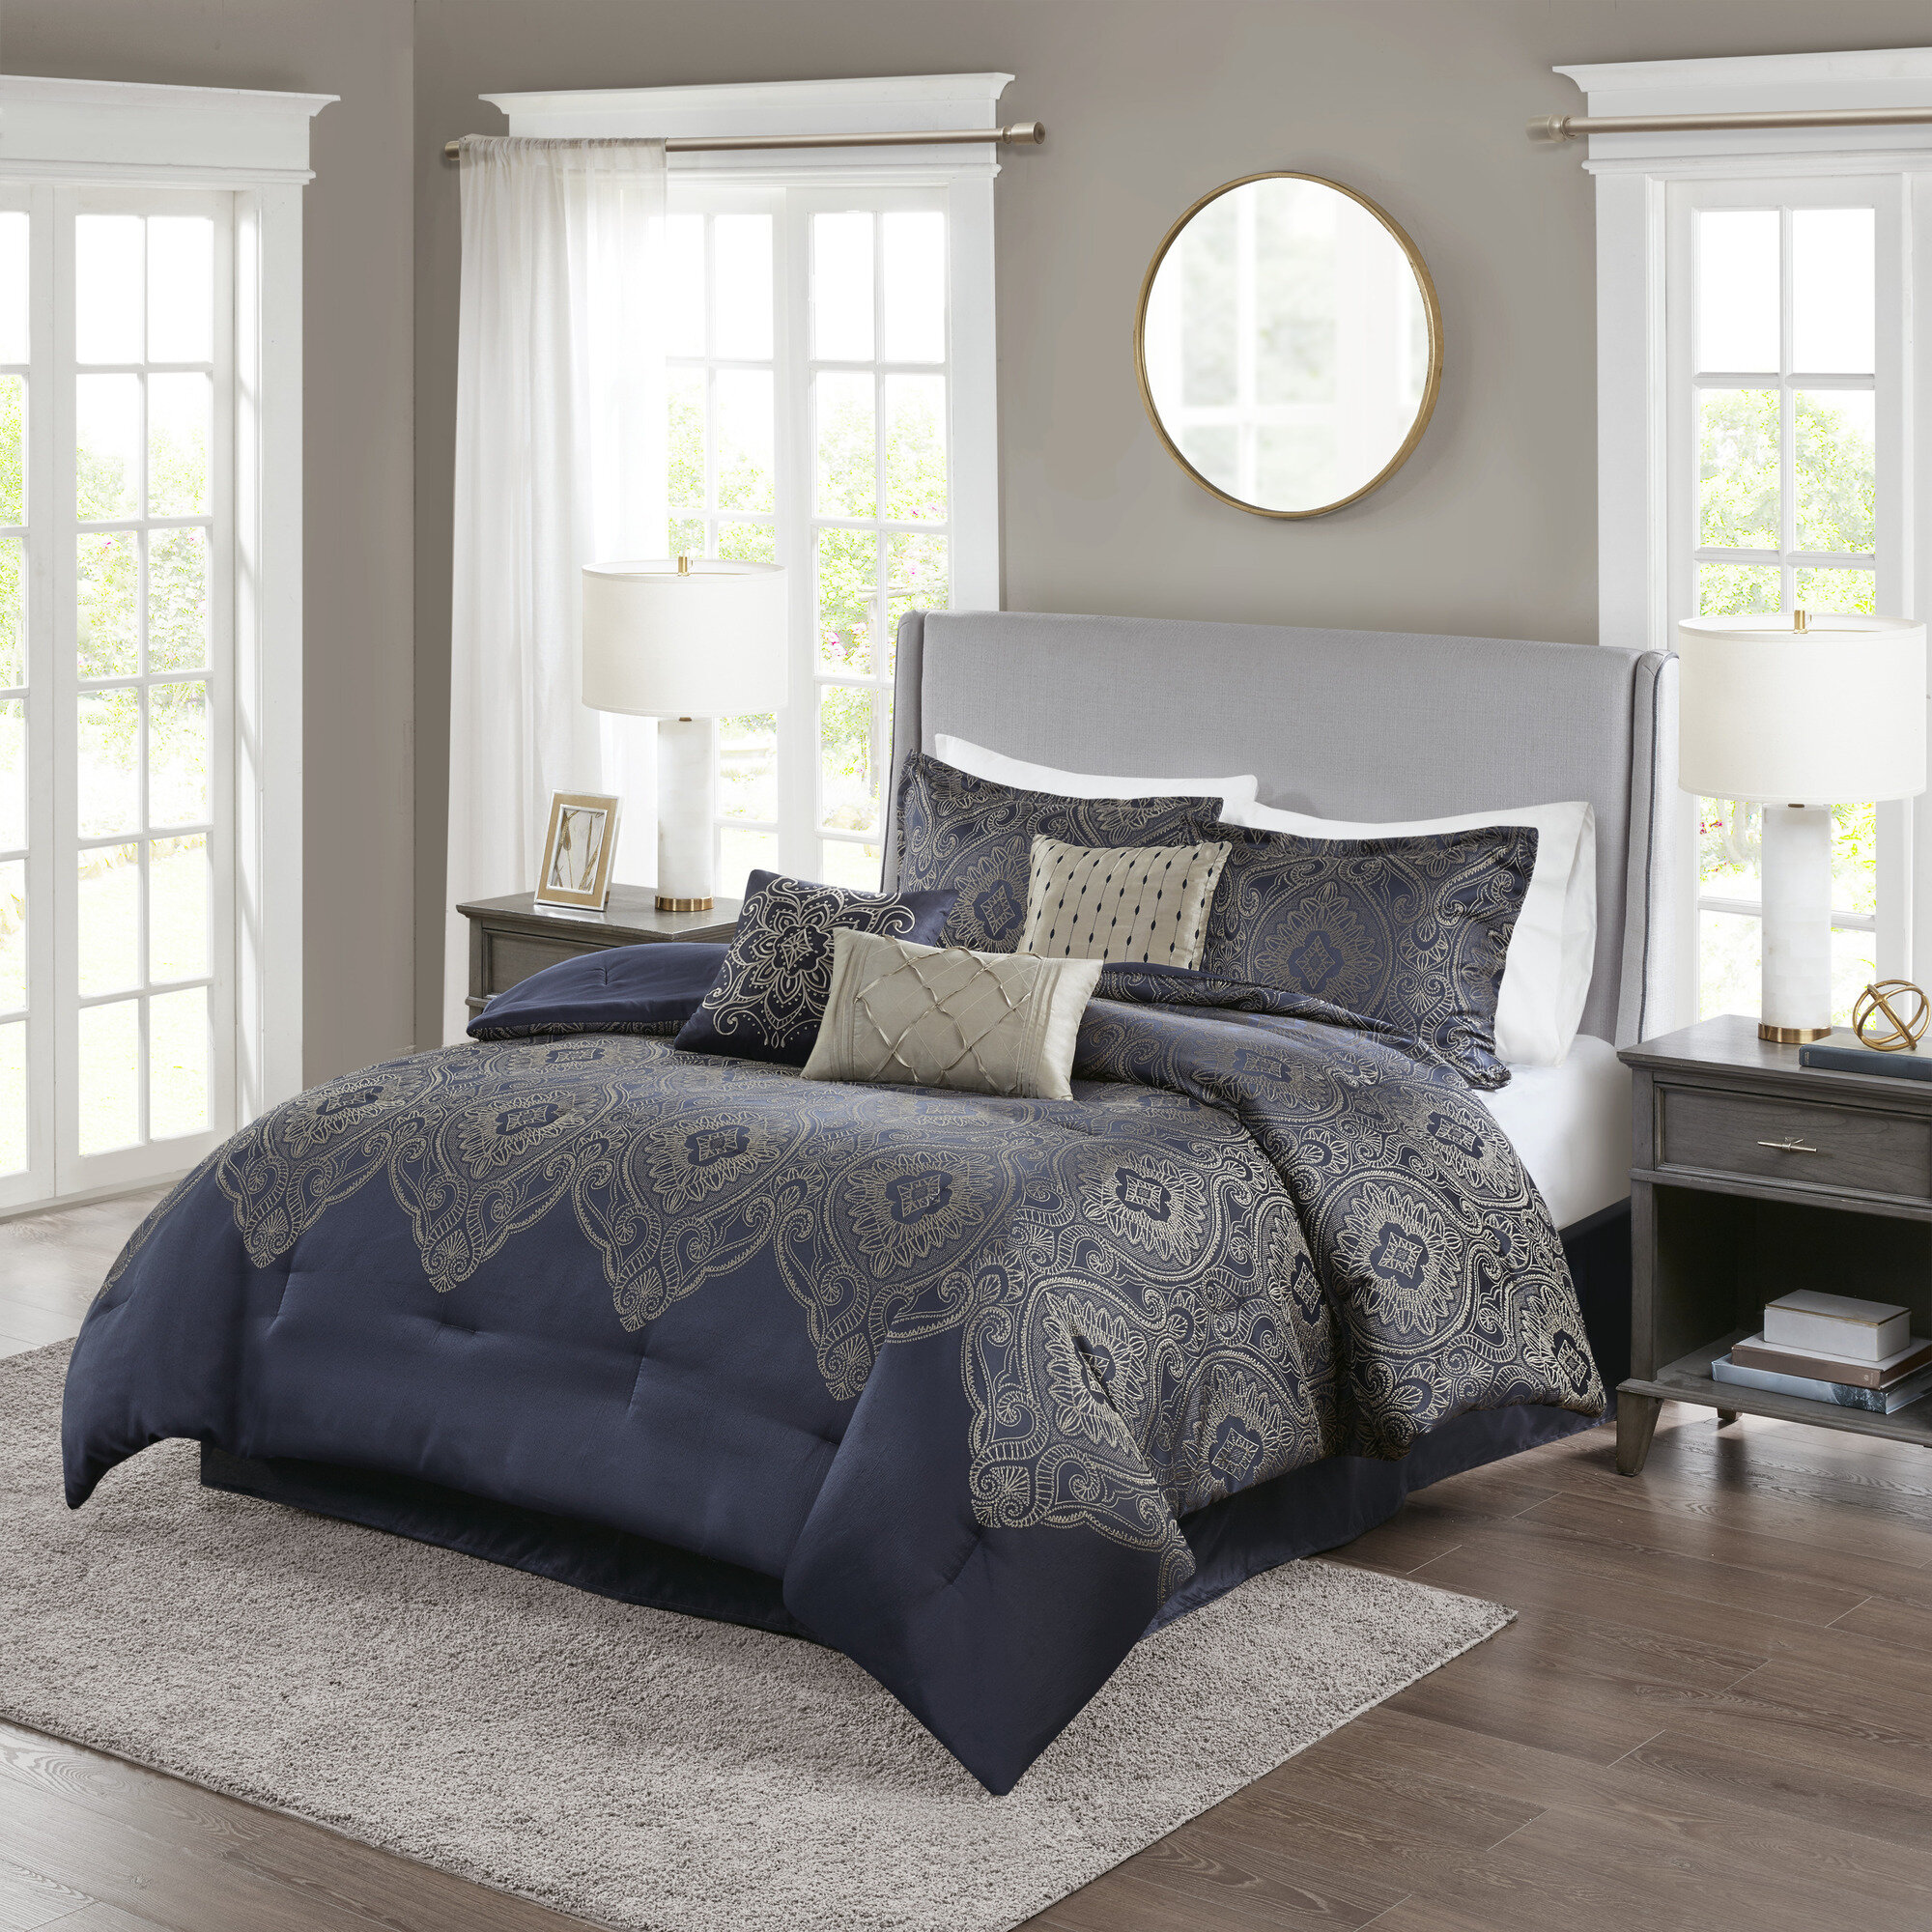 7 Pieces Luxury Embroidery Pattern Microfiber Comforter Set Navy Blue King Size 